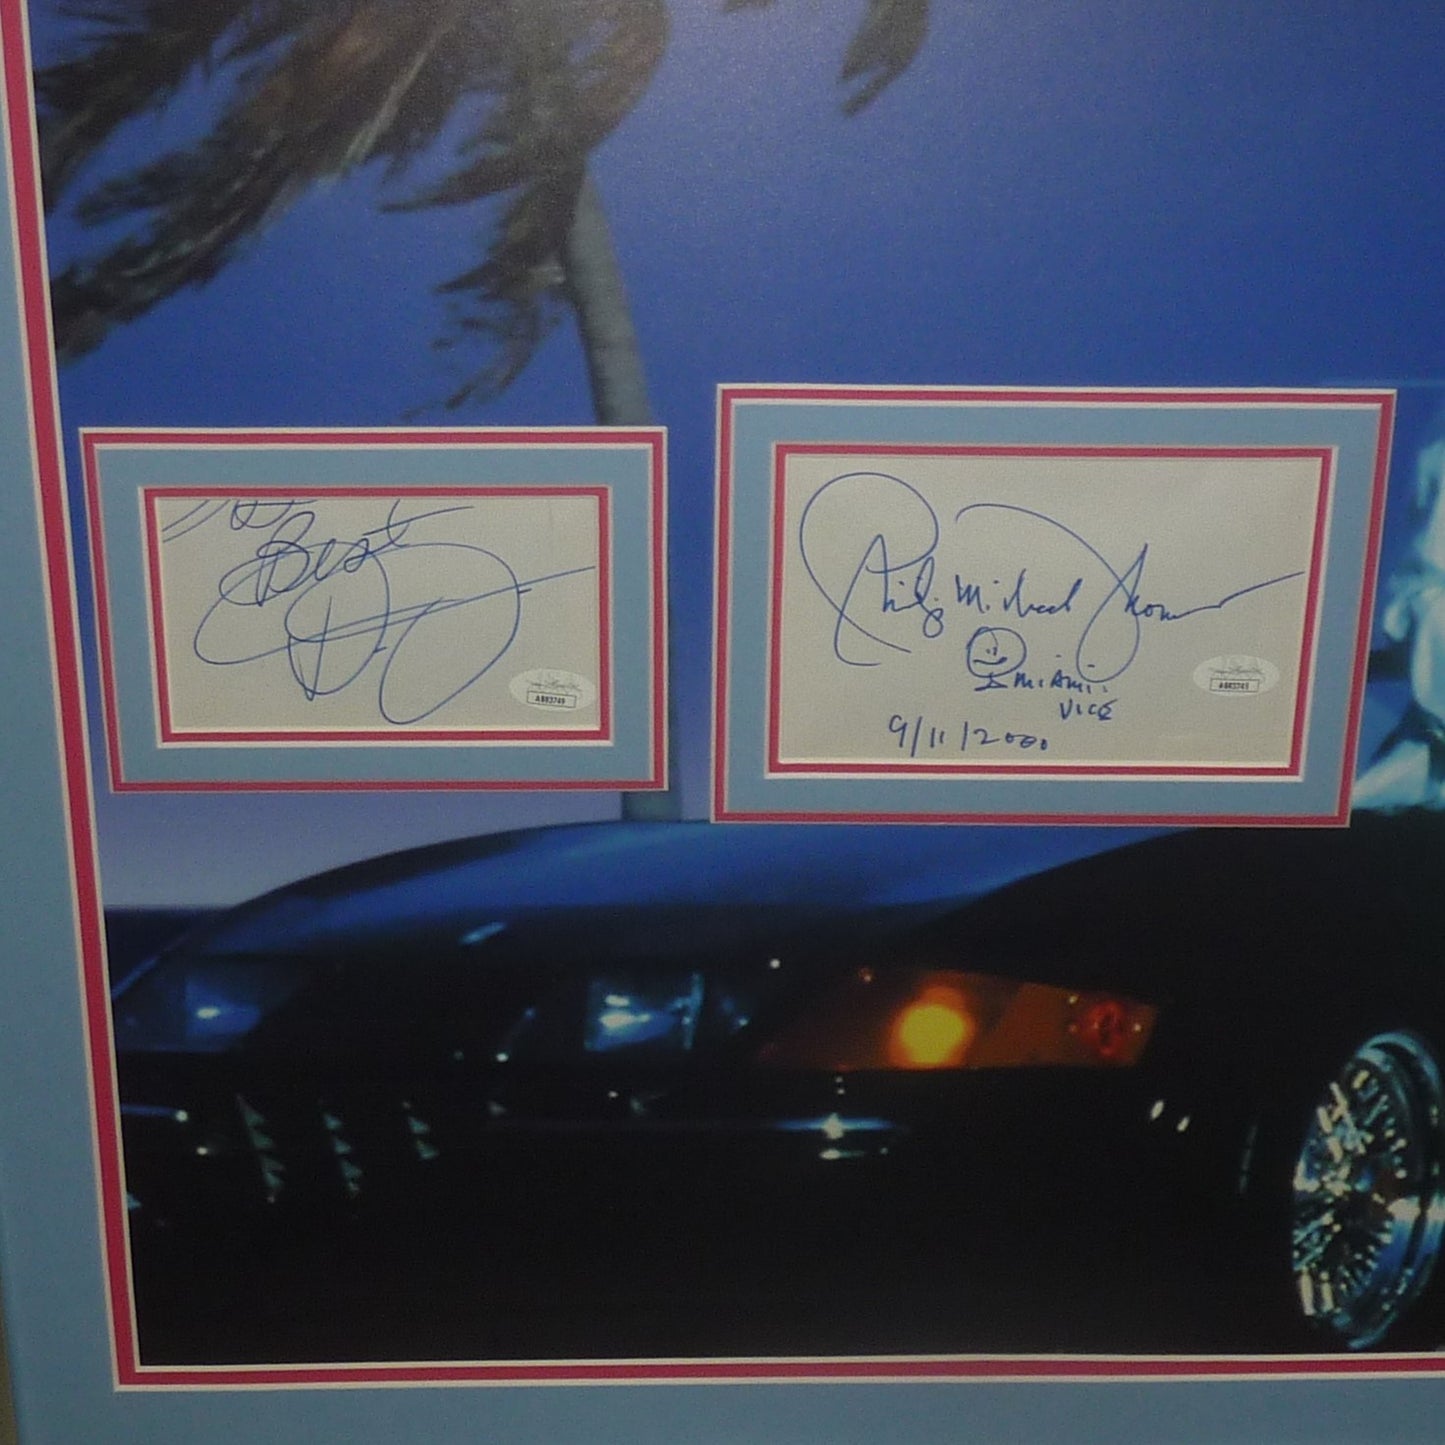 Miami Vice Full-Size Original Movie Poster Deluxe Framed with Don Johnson And Philip Michael Thomas Autographs - JSA